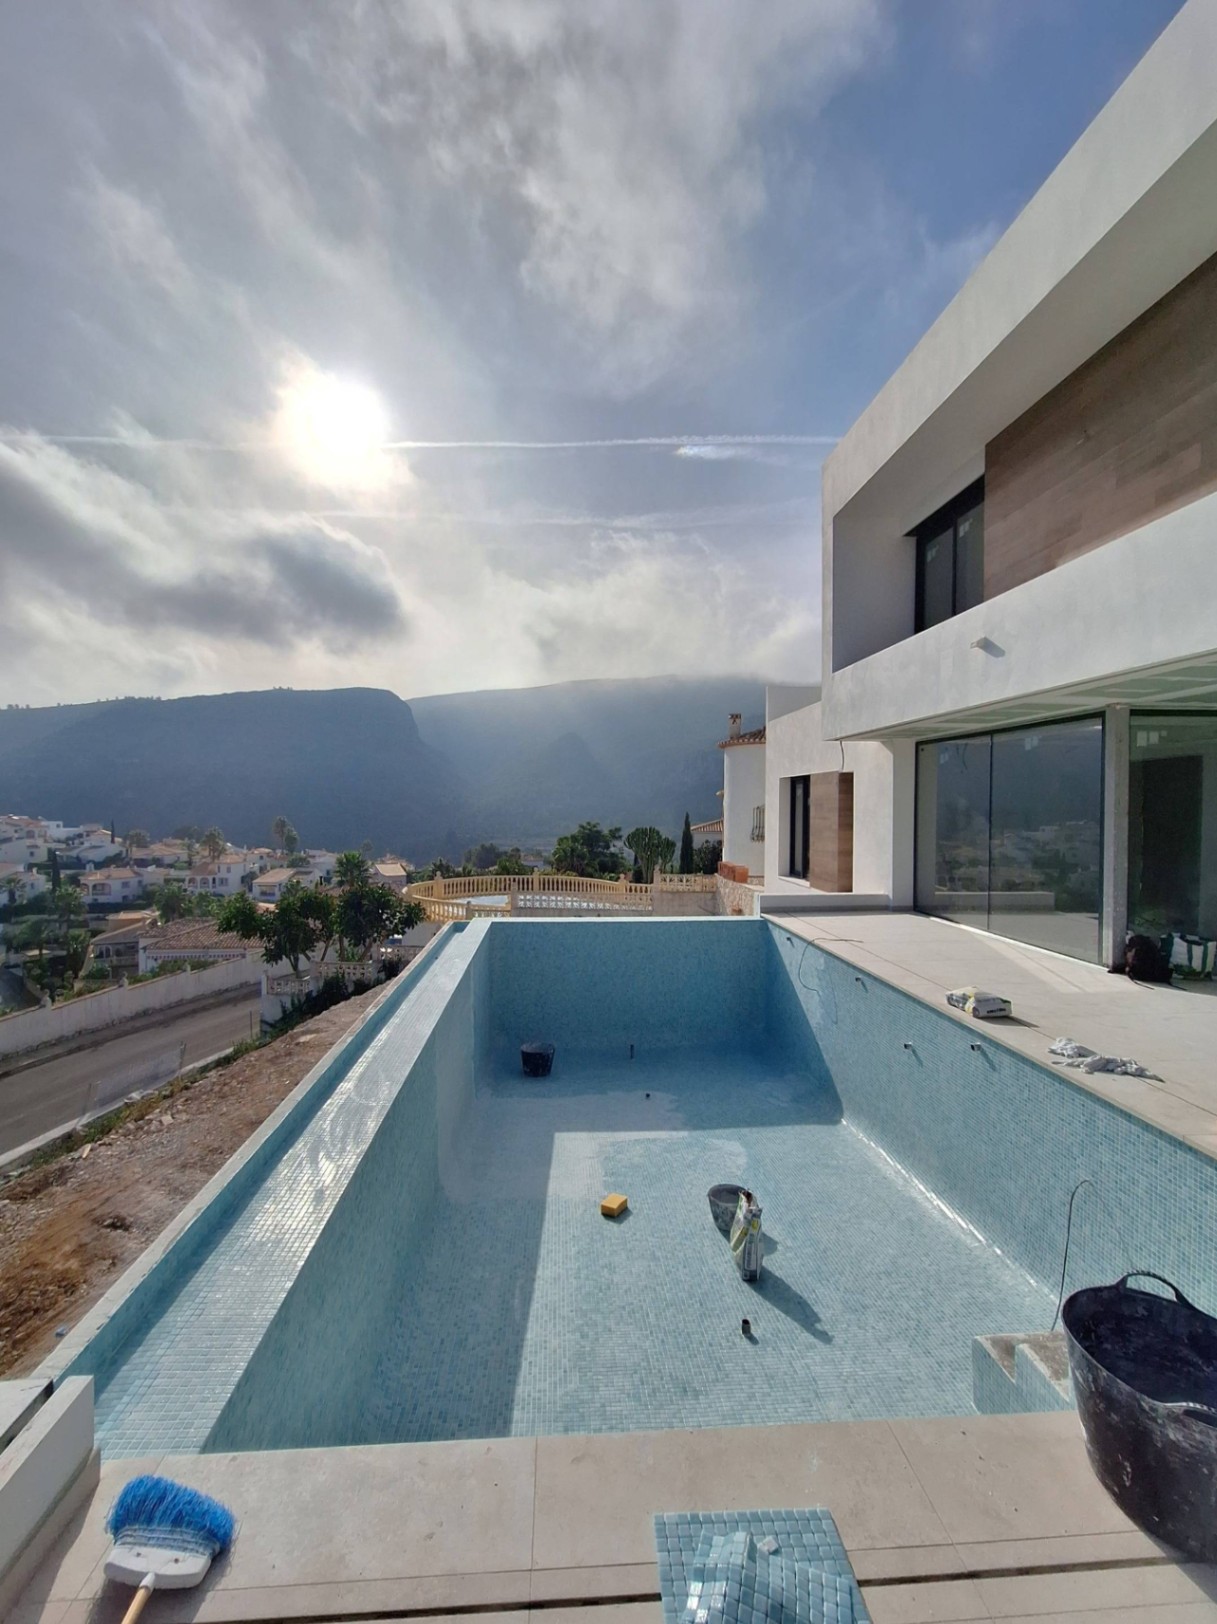 Beautiful villa in Monte Solana/Pedreguer about to be completed